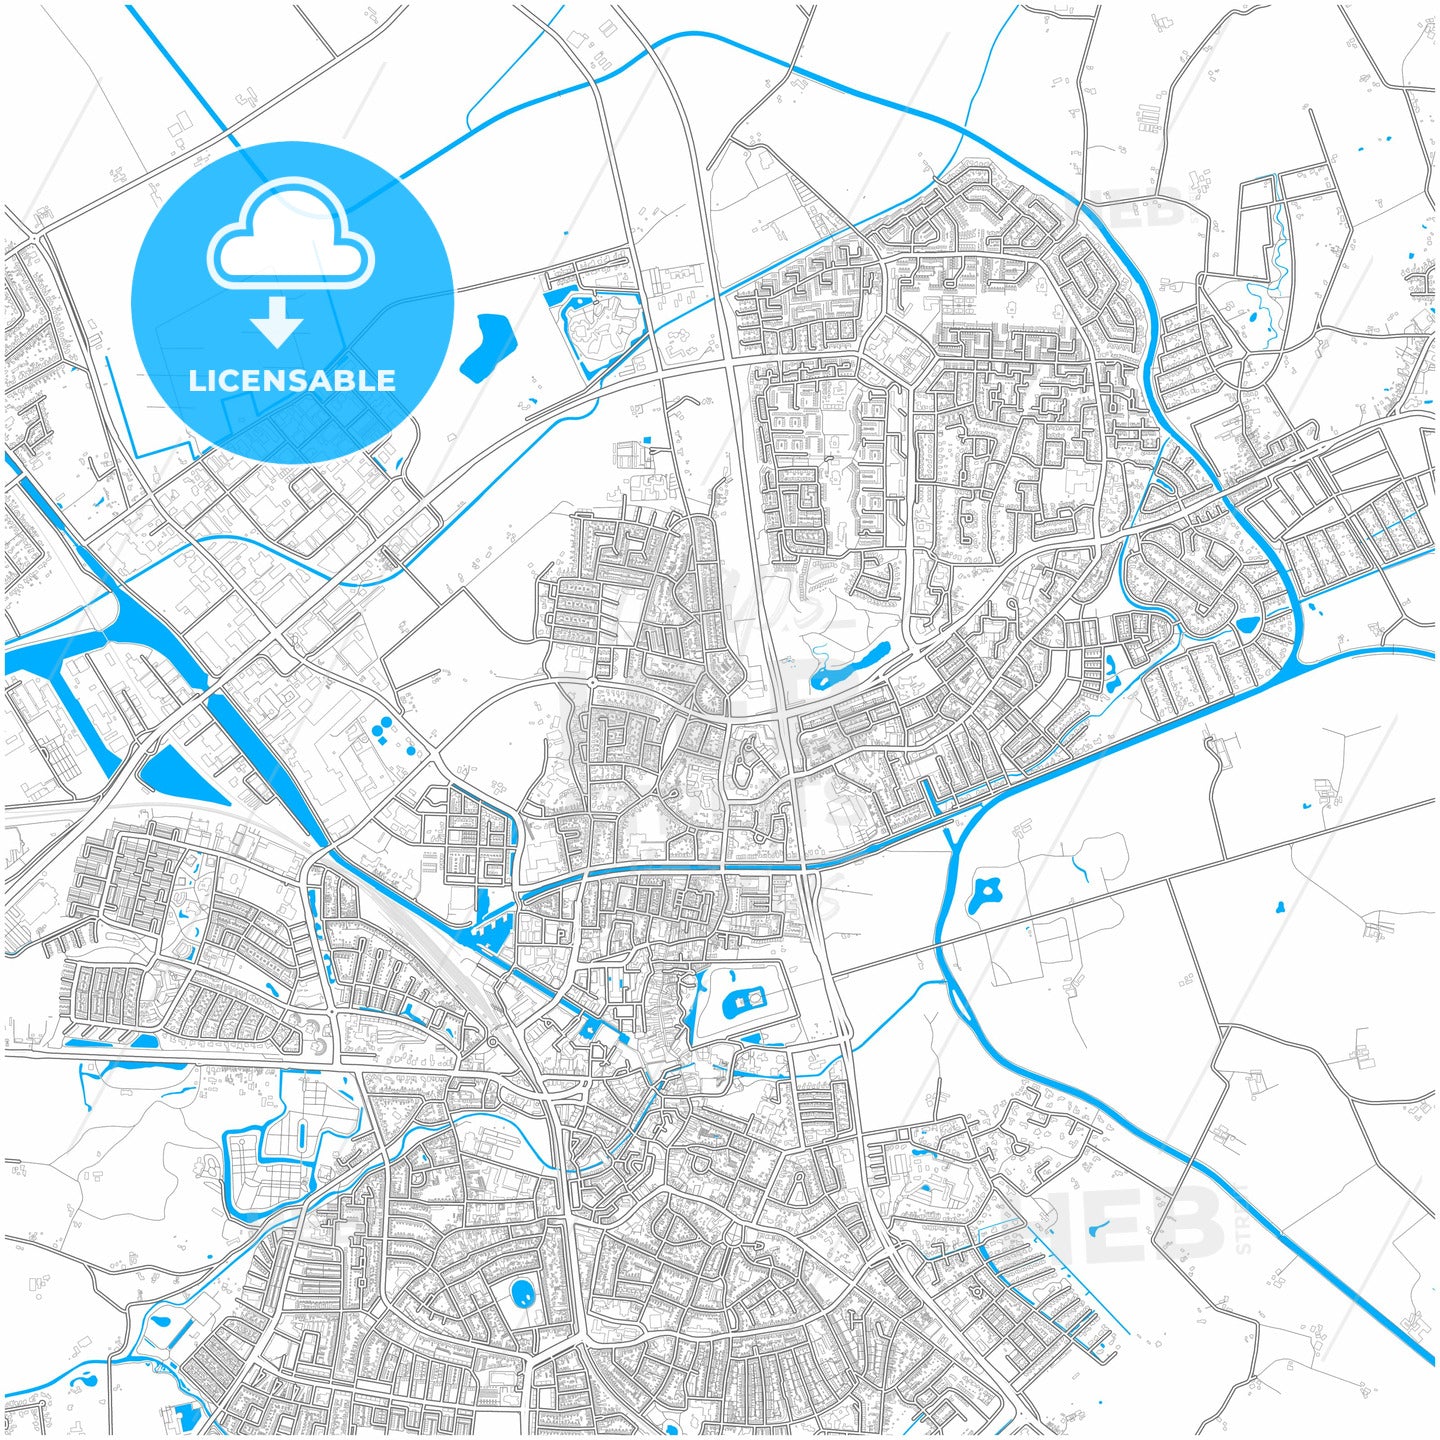 Almelo, Overijssel, Netherlands, city map with high quality roads.